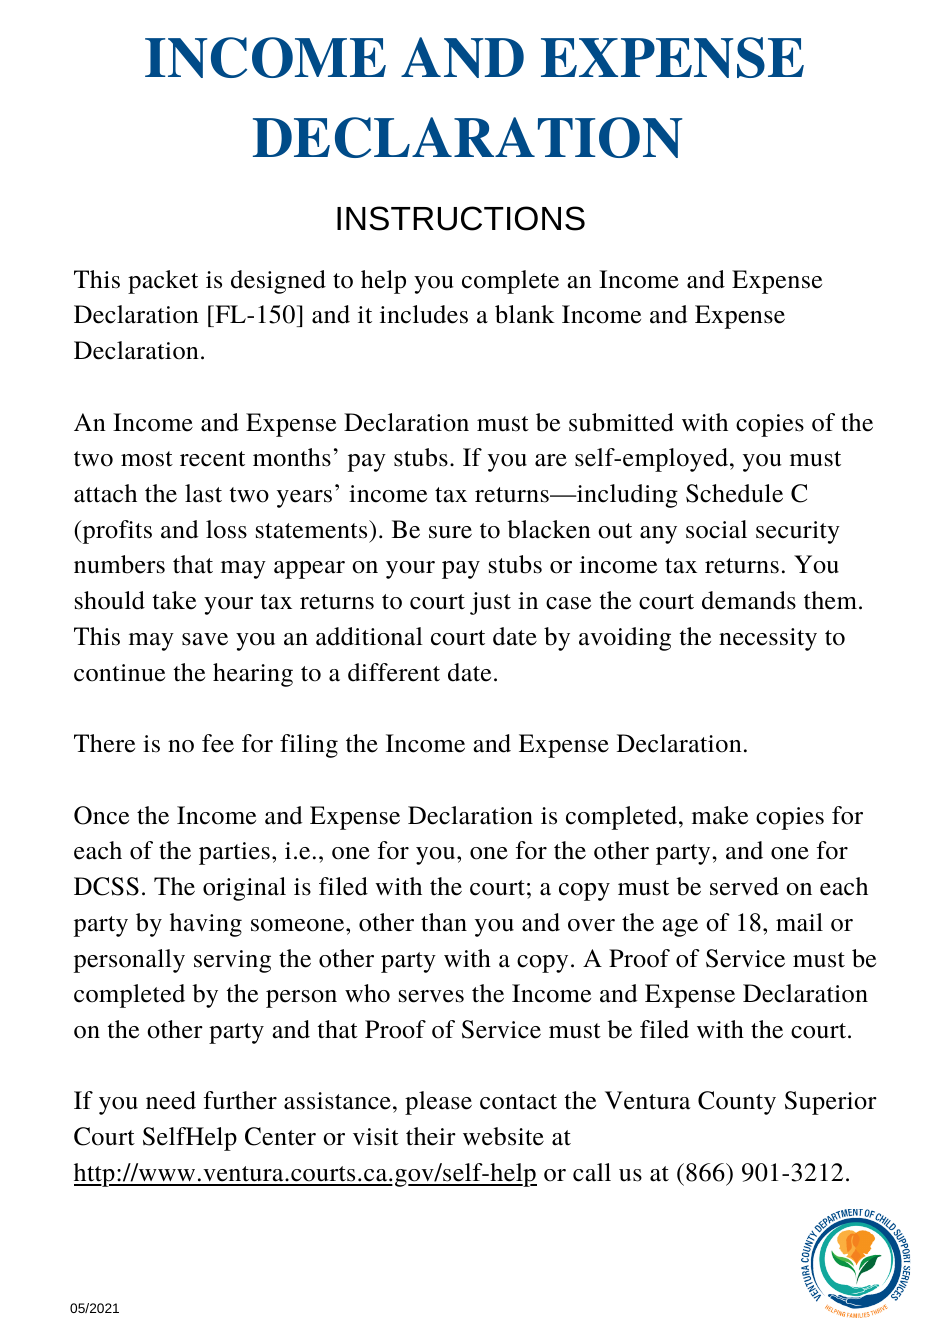 Instructions for Form FL-150 Income and Expense Declaration - County of Ventura, California, Page 1